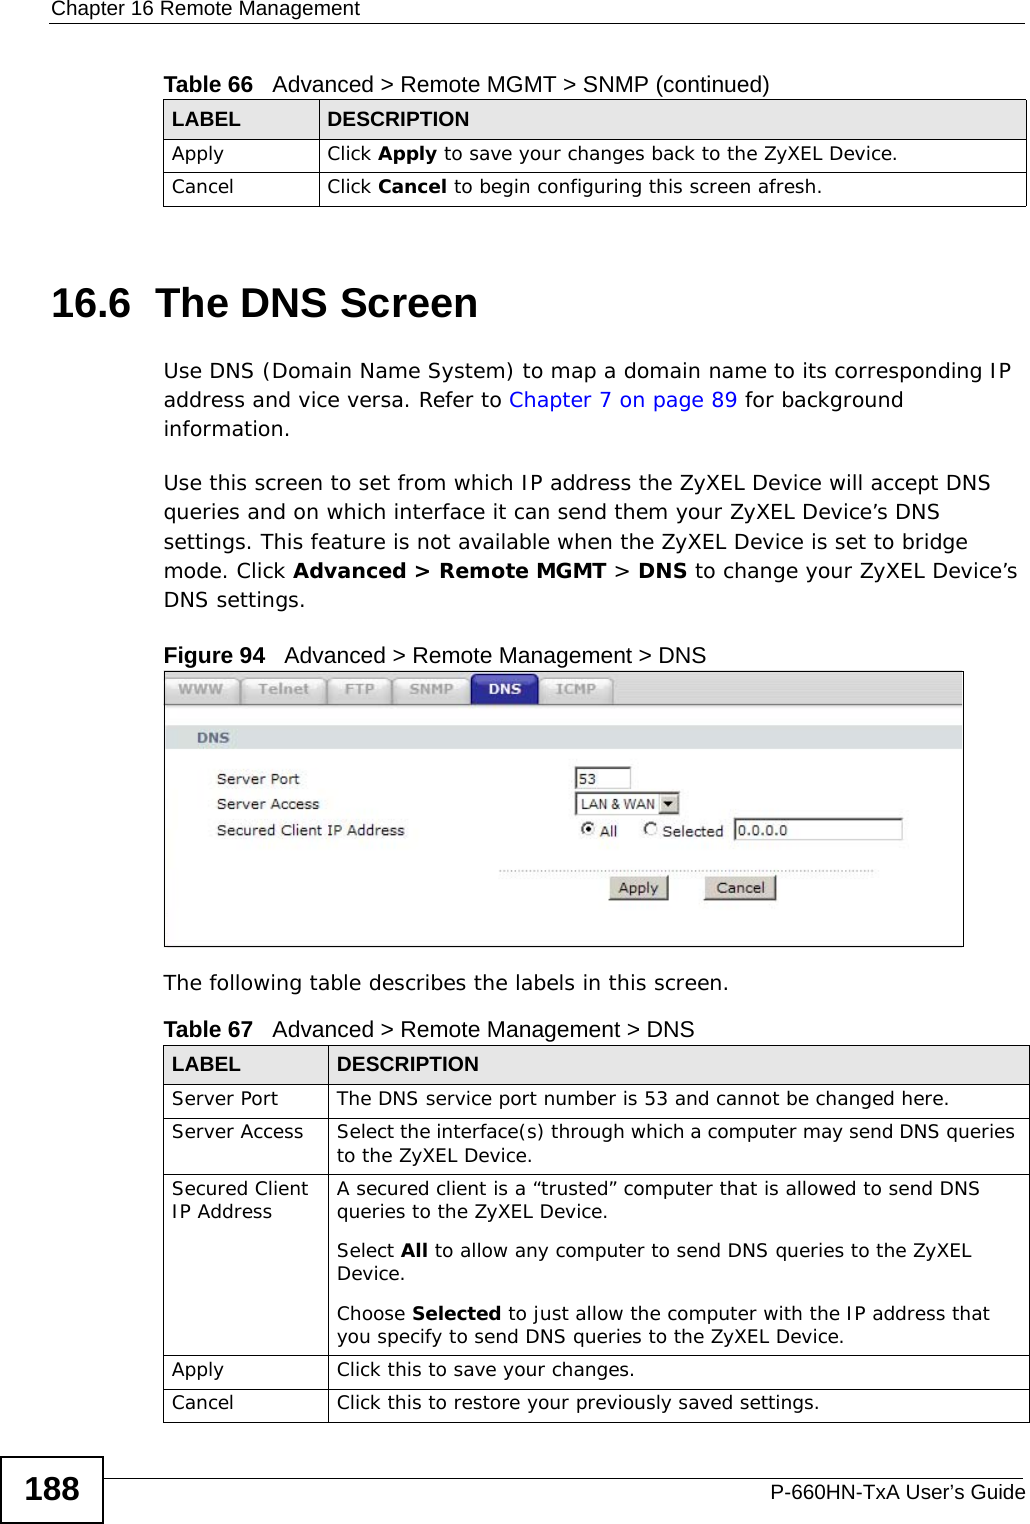 Chapter 16 Remote ManagementP-660HN-TxA User’s Guide18816.6  The DNS Screen Use DNS (Domain Name System) to map a domain name to its corresponding IP address and vice versa. Refer to Chapter 7 on page 89 for background information. Use this screen to set from which IP address the ZyXEL Device will accept DNS queries and on which interface it can send them your ZyXEL Device’s DNS settings. This feature is not available when the ZyXEL Device is set to bridge mode. Click Advanced &gt; Remote MGMT &gt; DNS to change your ZyXEL Device’s DNS settings.Figure 94   Advanced &gt; Remote Management &gt; DNSThe following table describes the labels in this screen.Apply Click Apply to save your changes back to the ZyXEL Device. Cancel Click Cancel to begin configuring this screen afresh.Table 66   Advanced &gt; Remote MGMT &gt; SNMP (continued)LABEL DESCRIPTIONTable 67   Advanced &gt; Remote Management &gt; DNSLABEL DESCRIPTIONServer Port The DNS service port number is 53 and cannot be changed here.Server Access  Select the interface(s) through which a computer may send DNS queries to the ZyXEL Device.Secured Client IP Address A secured client is a “trusted” computer that is allowed to send DNS queries to the ZyXEL Device.Select All to allow any computer to send DNS queries to the ZyXEL Device.Choose Selected to just allow the computer with the IP address that you specify to send DNS queries to the ZyXEL Device.Apply Click this to save your changes.Cancel Click this to restore your previously saved settings.